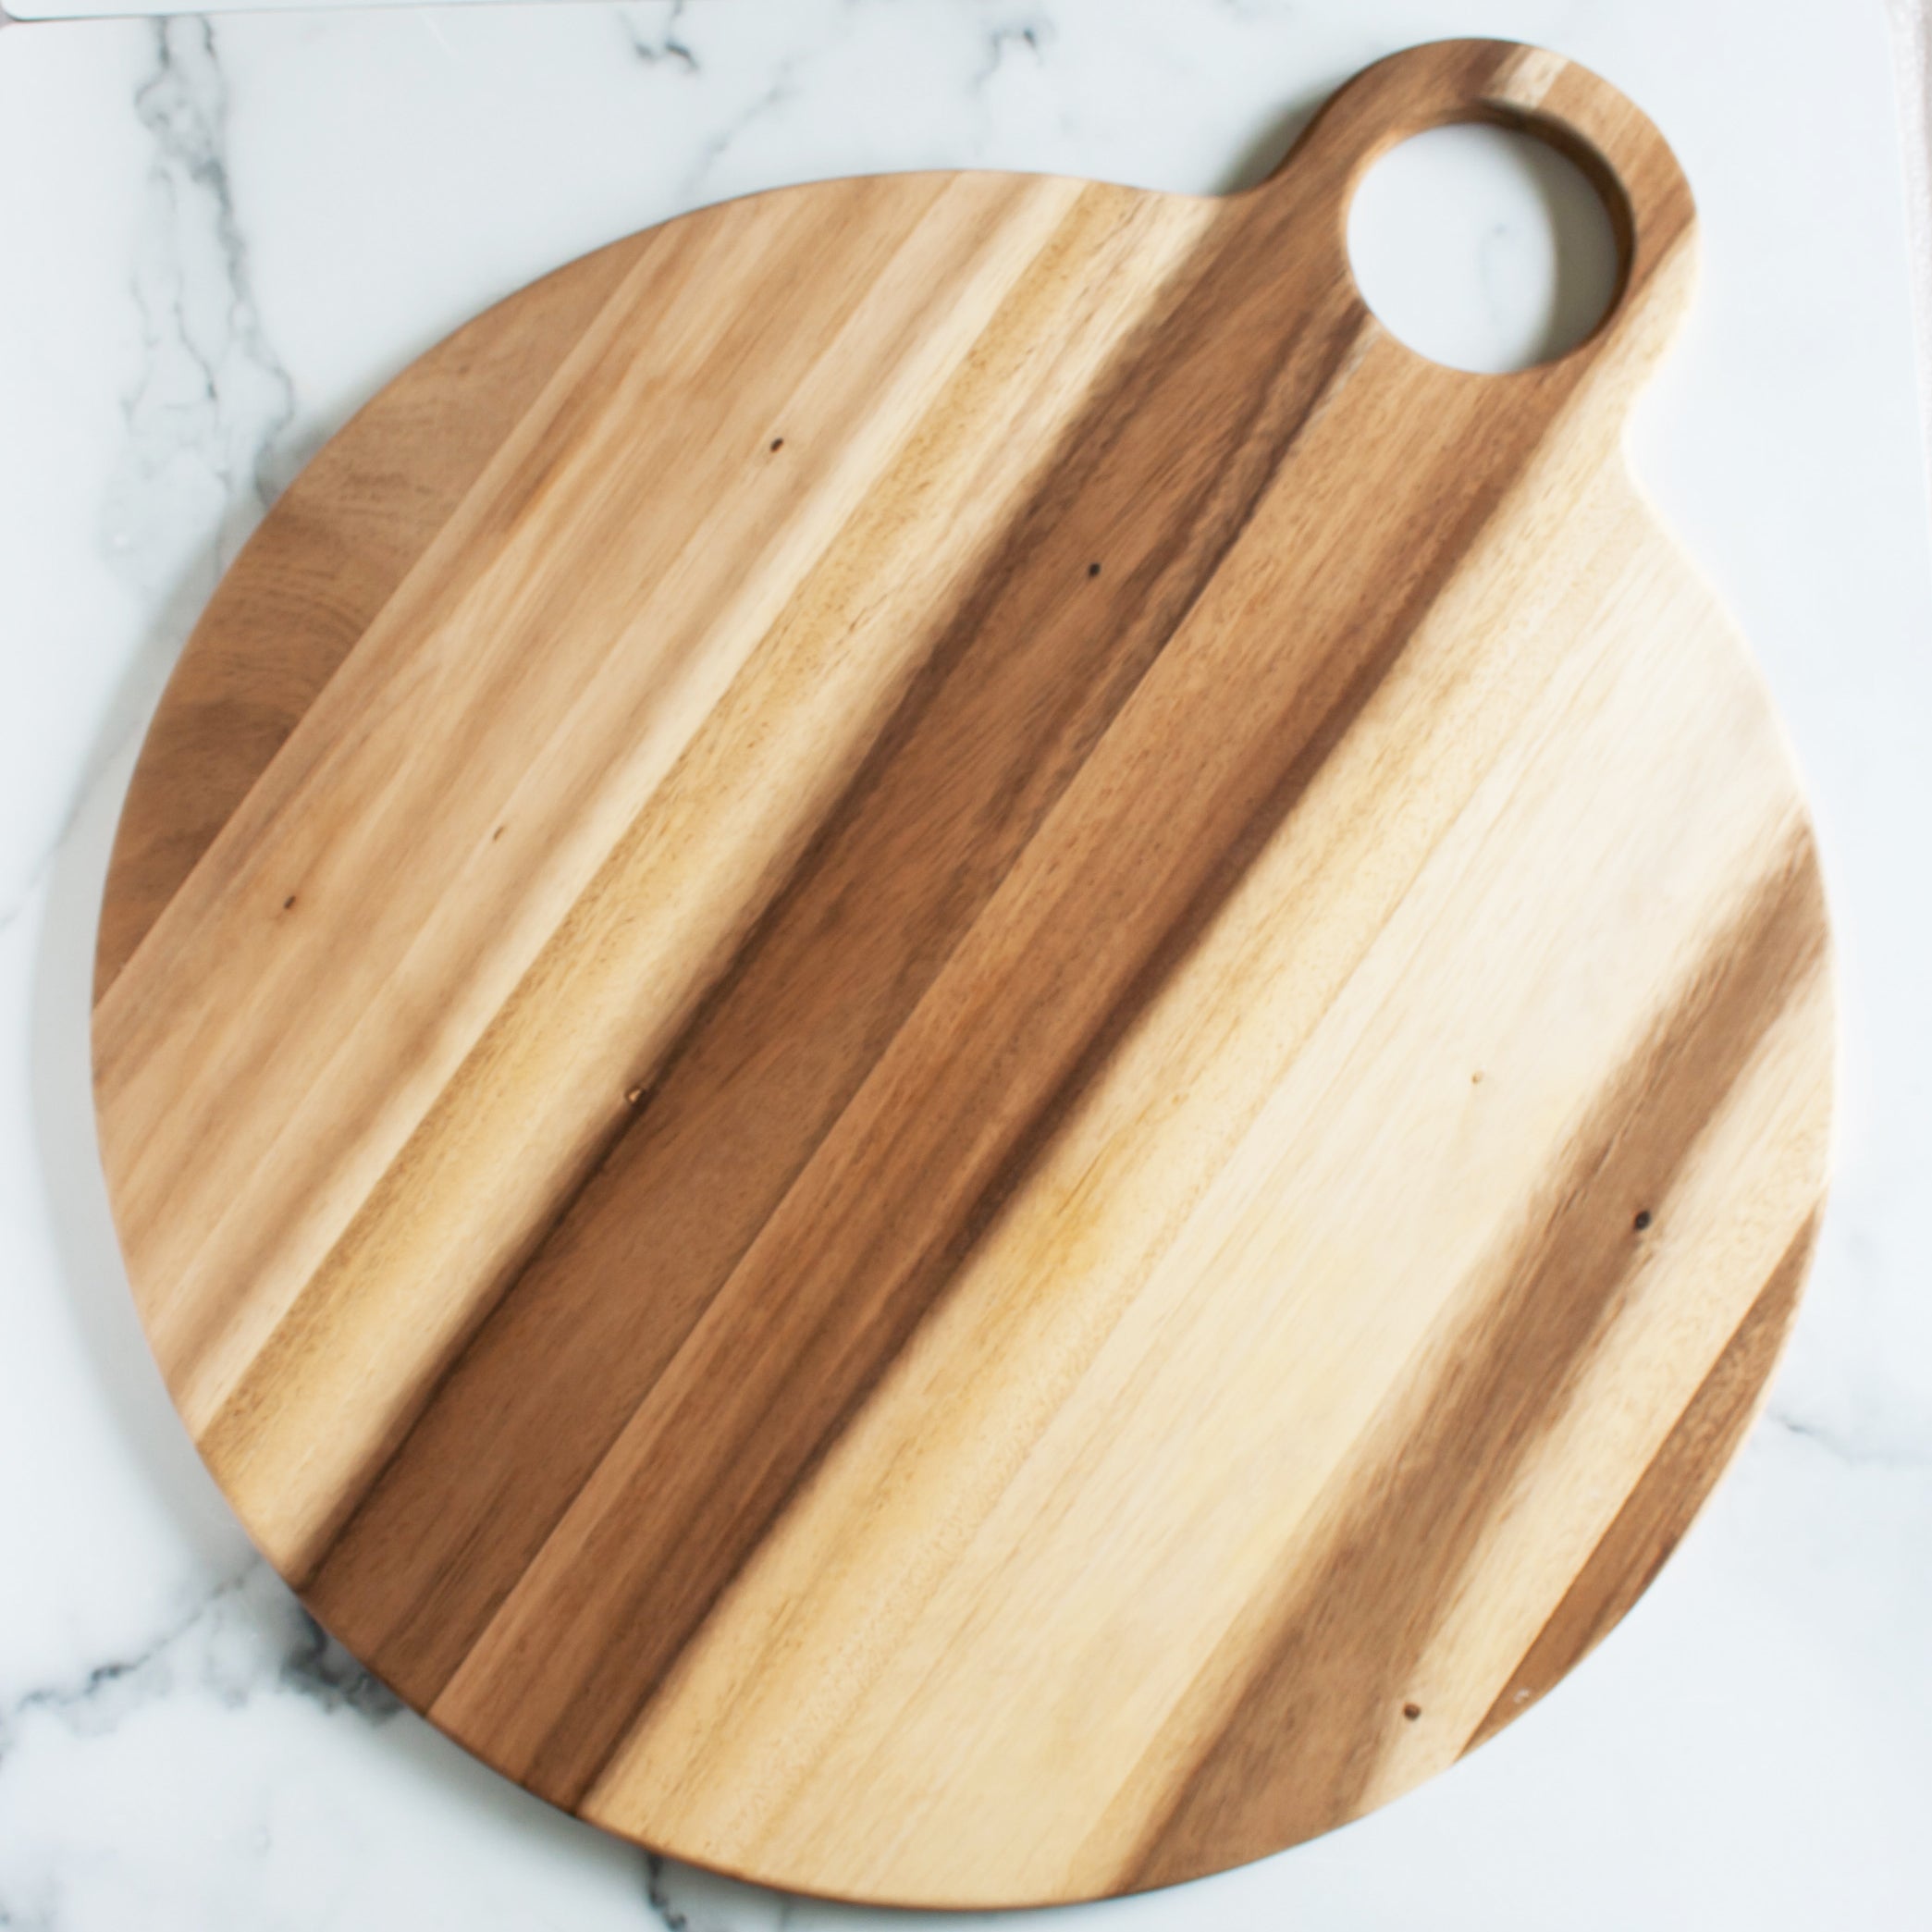 Set of 3 Cutting Boards With Handles, Herb Boards, Made From Olive